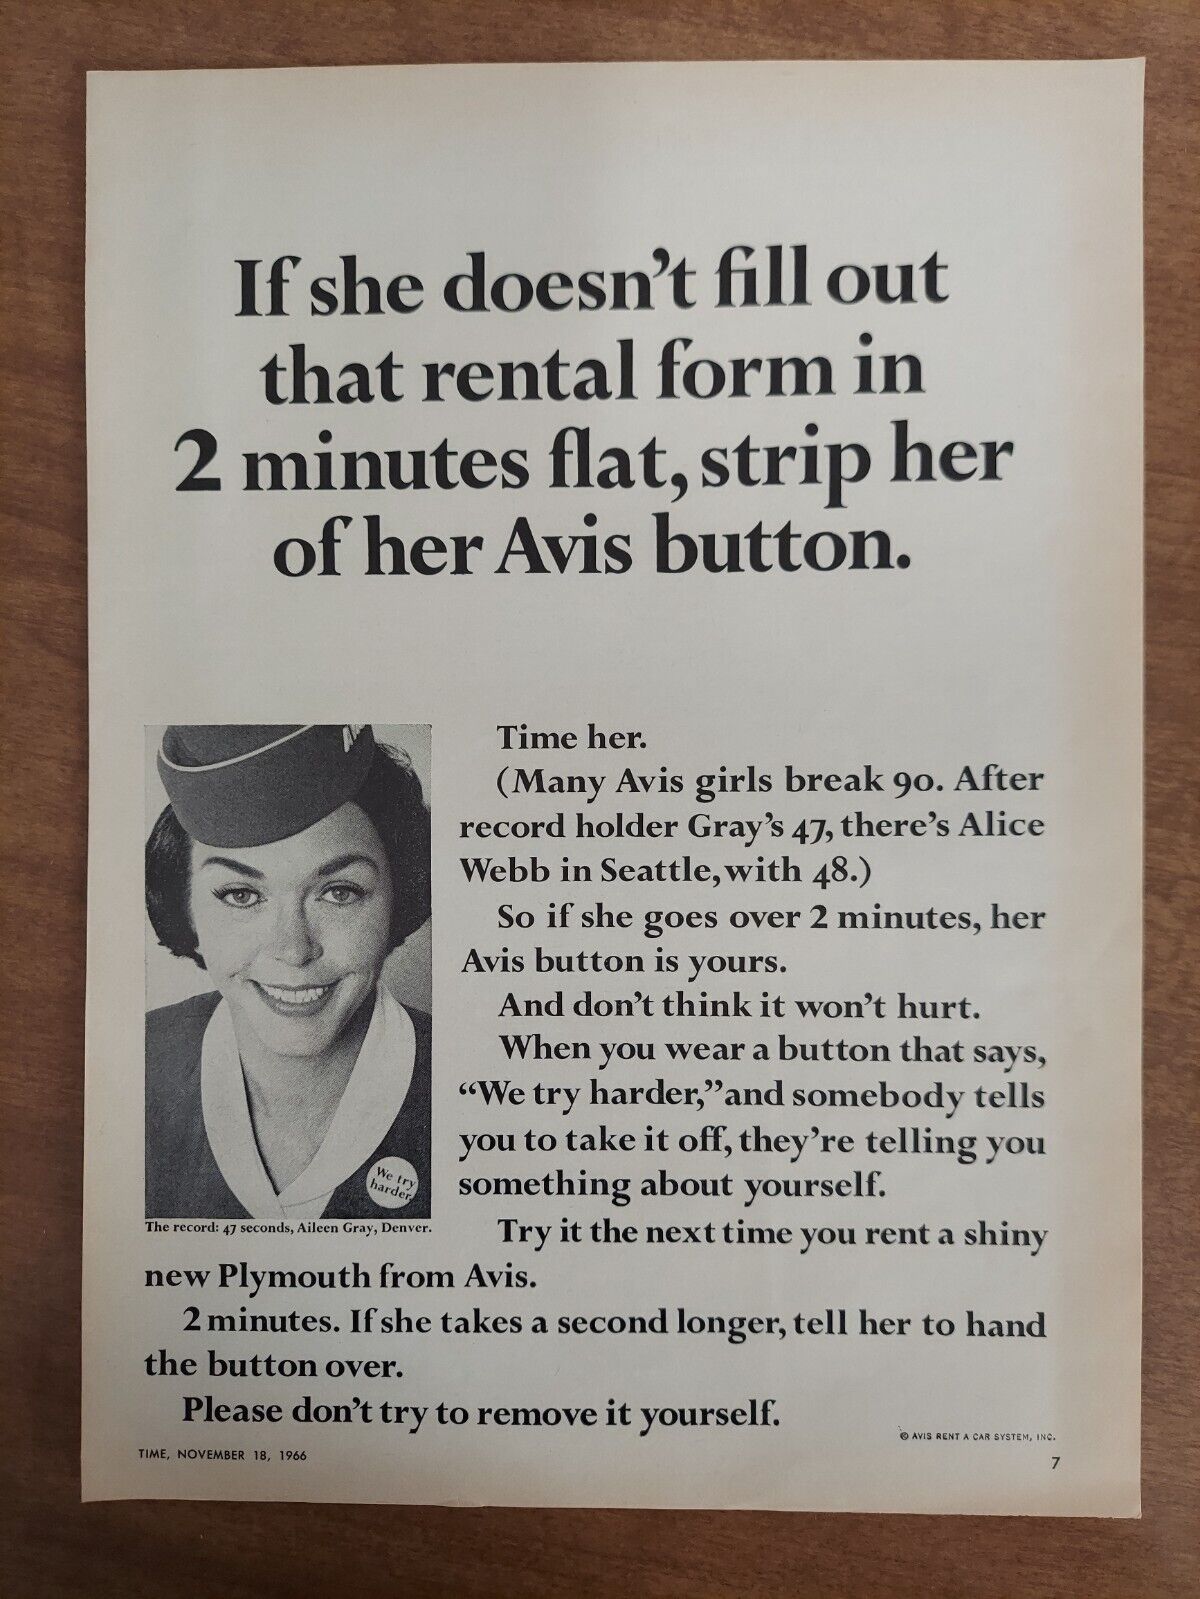 Avis Rent A Car System Inc Aileen Gray Plymouth Cars  1966 Vintage Print Ad